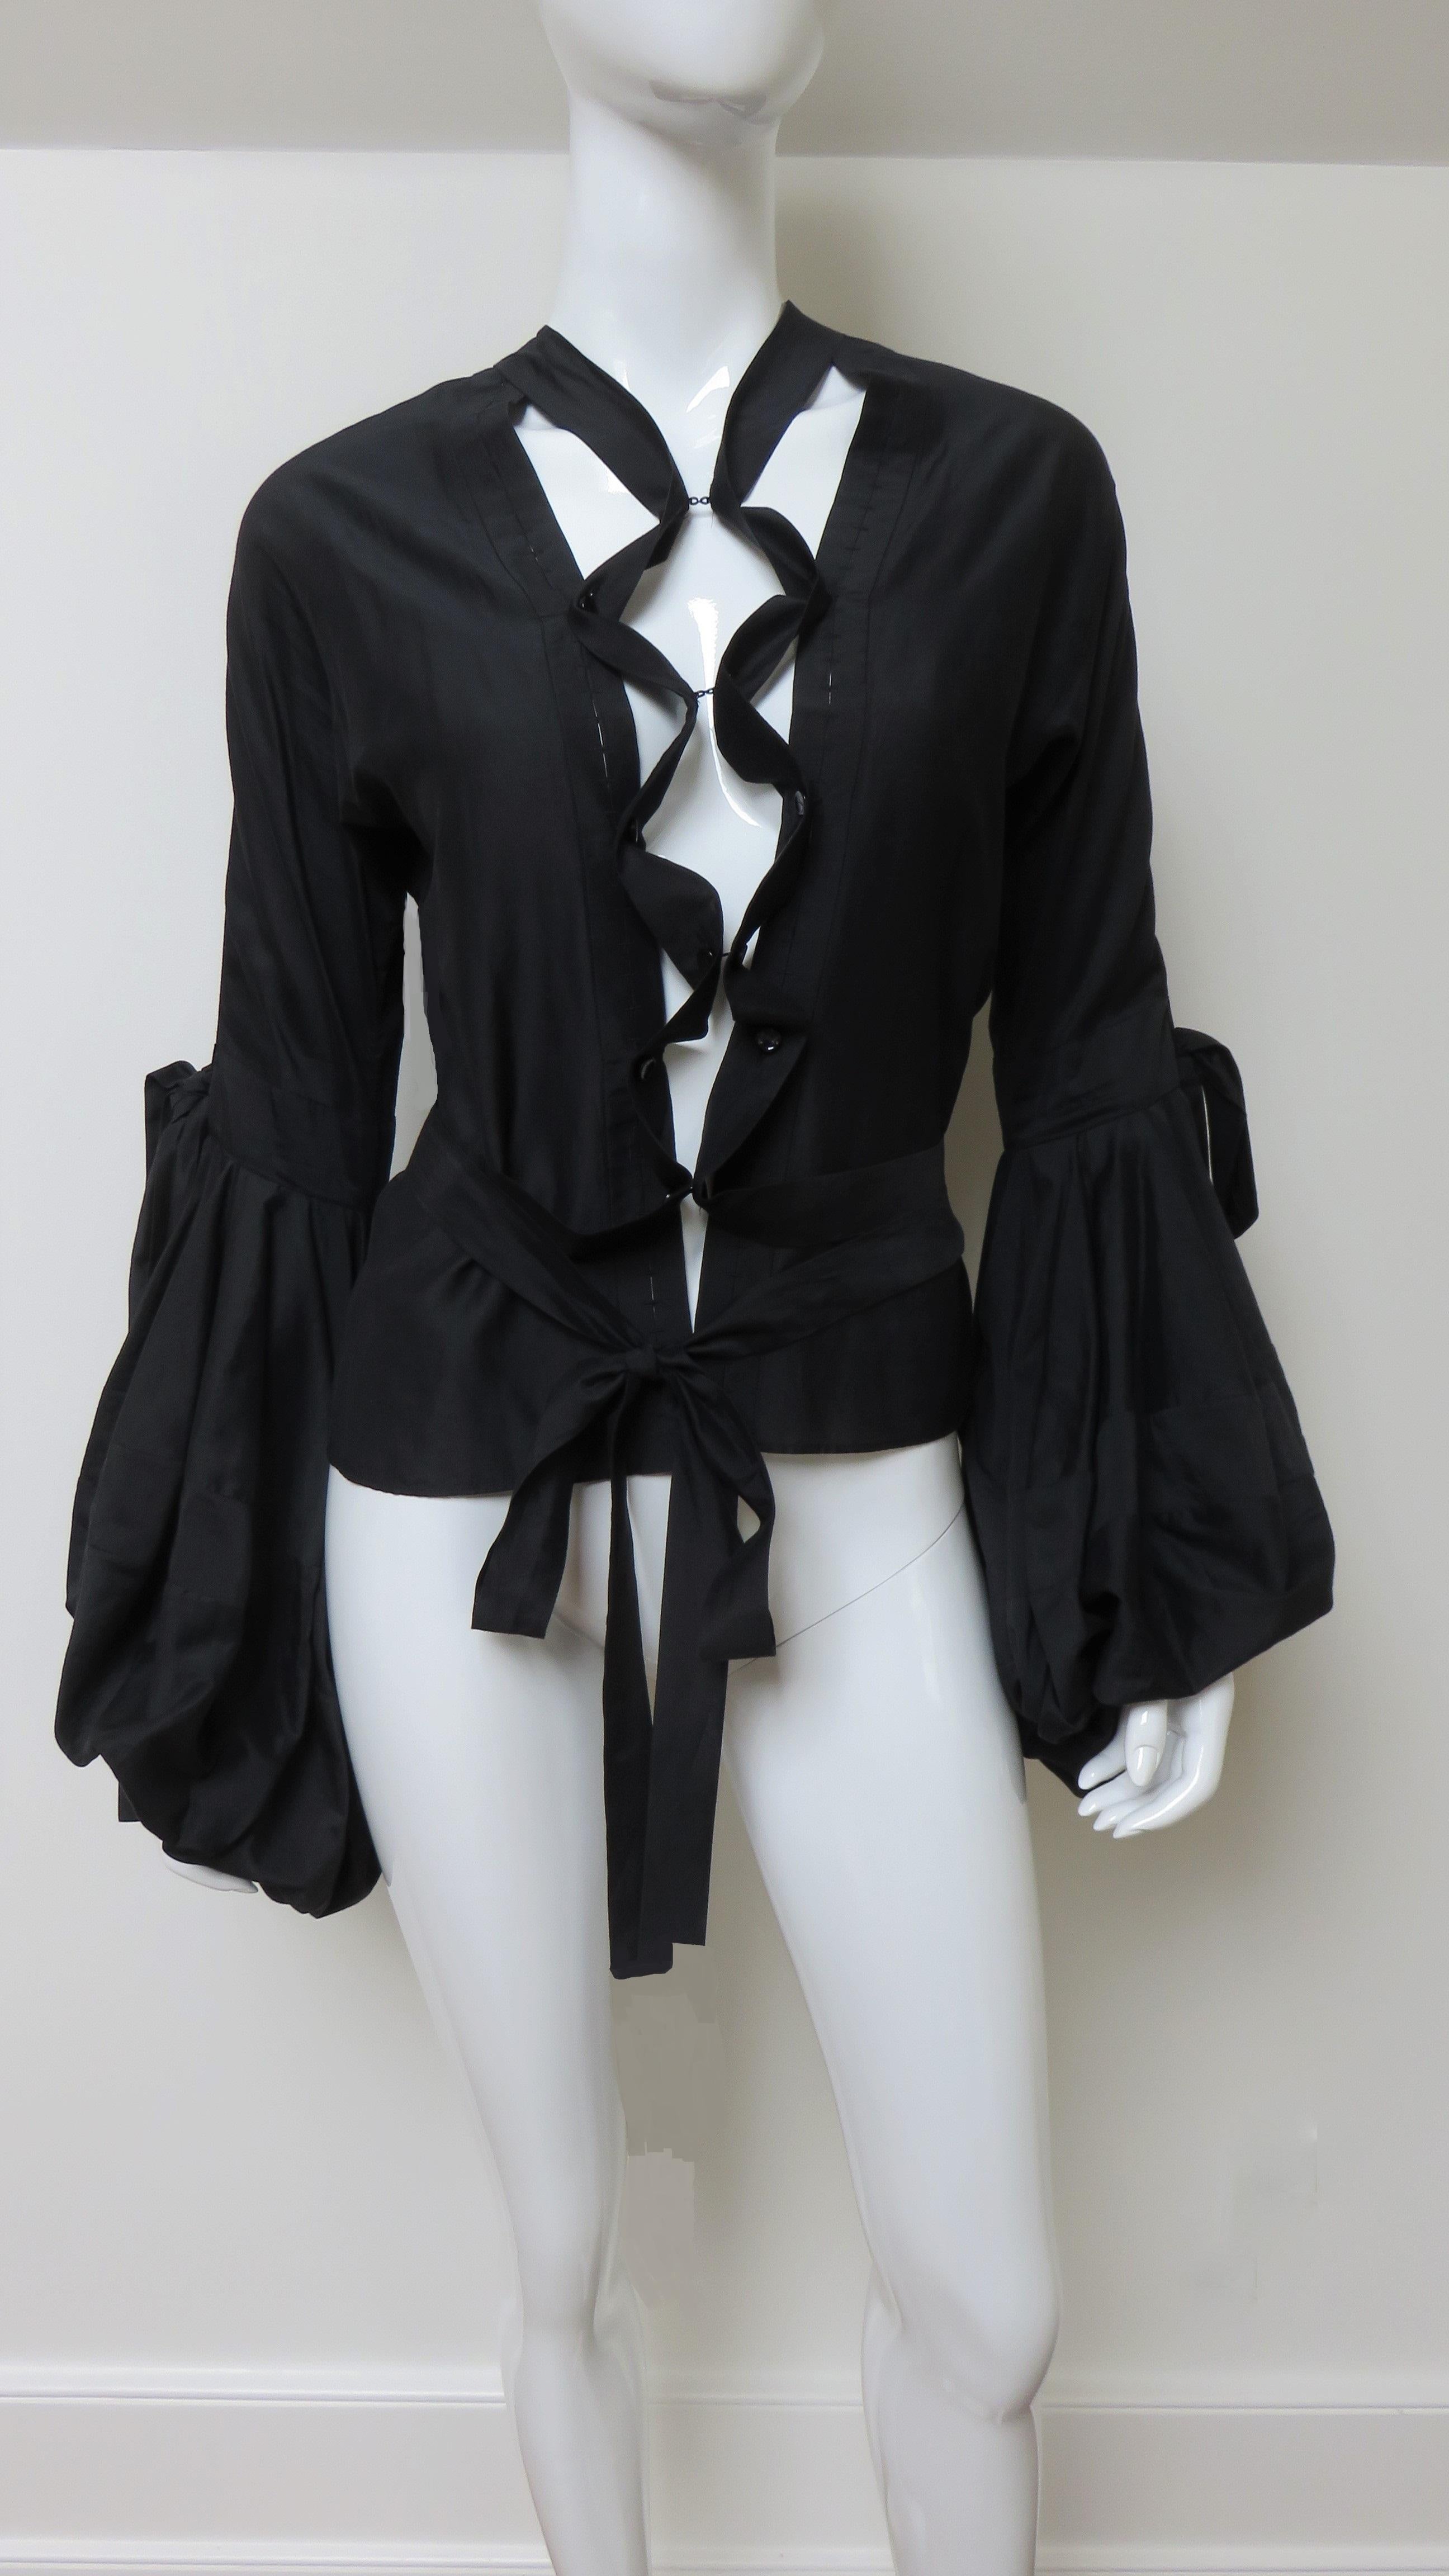 Tom Ford for Yves Saint Laurent Lace up Blouse F/W 2002 2